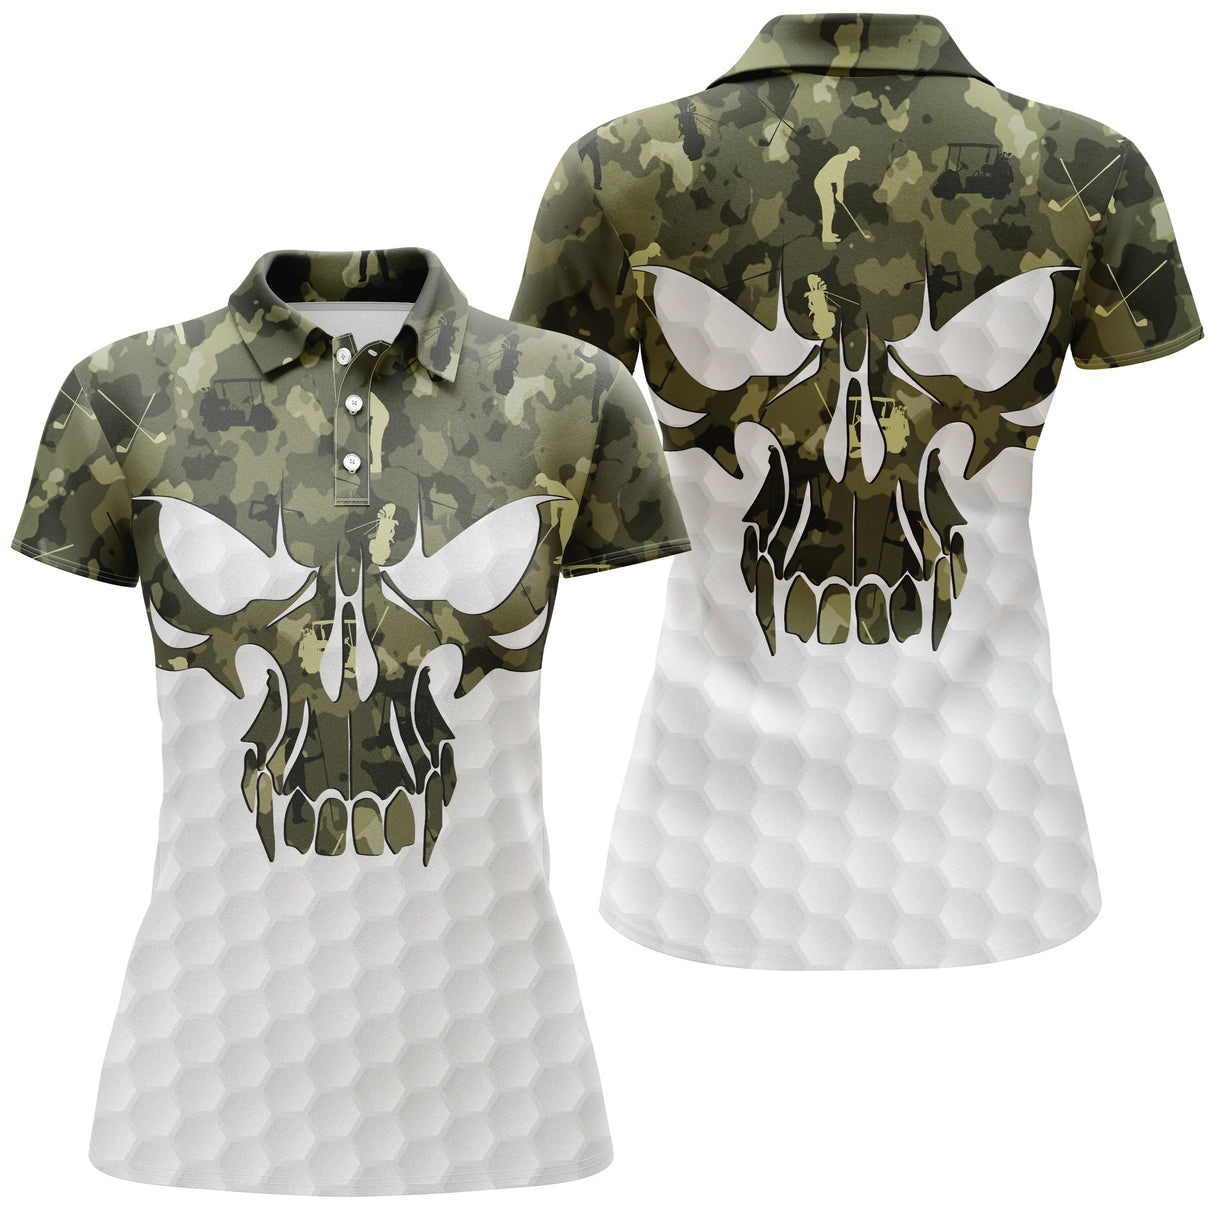 Chiptshirts - Golf Polo Shirt, Original Gift for Golf Fans, Men's and Women's Sports Polo Shirt, Golf Camouflage, Golf Skull - CTS26052232